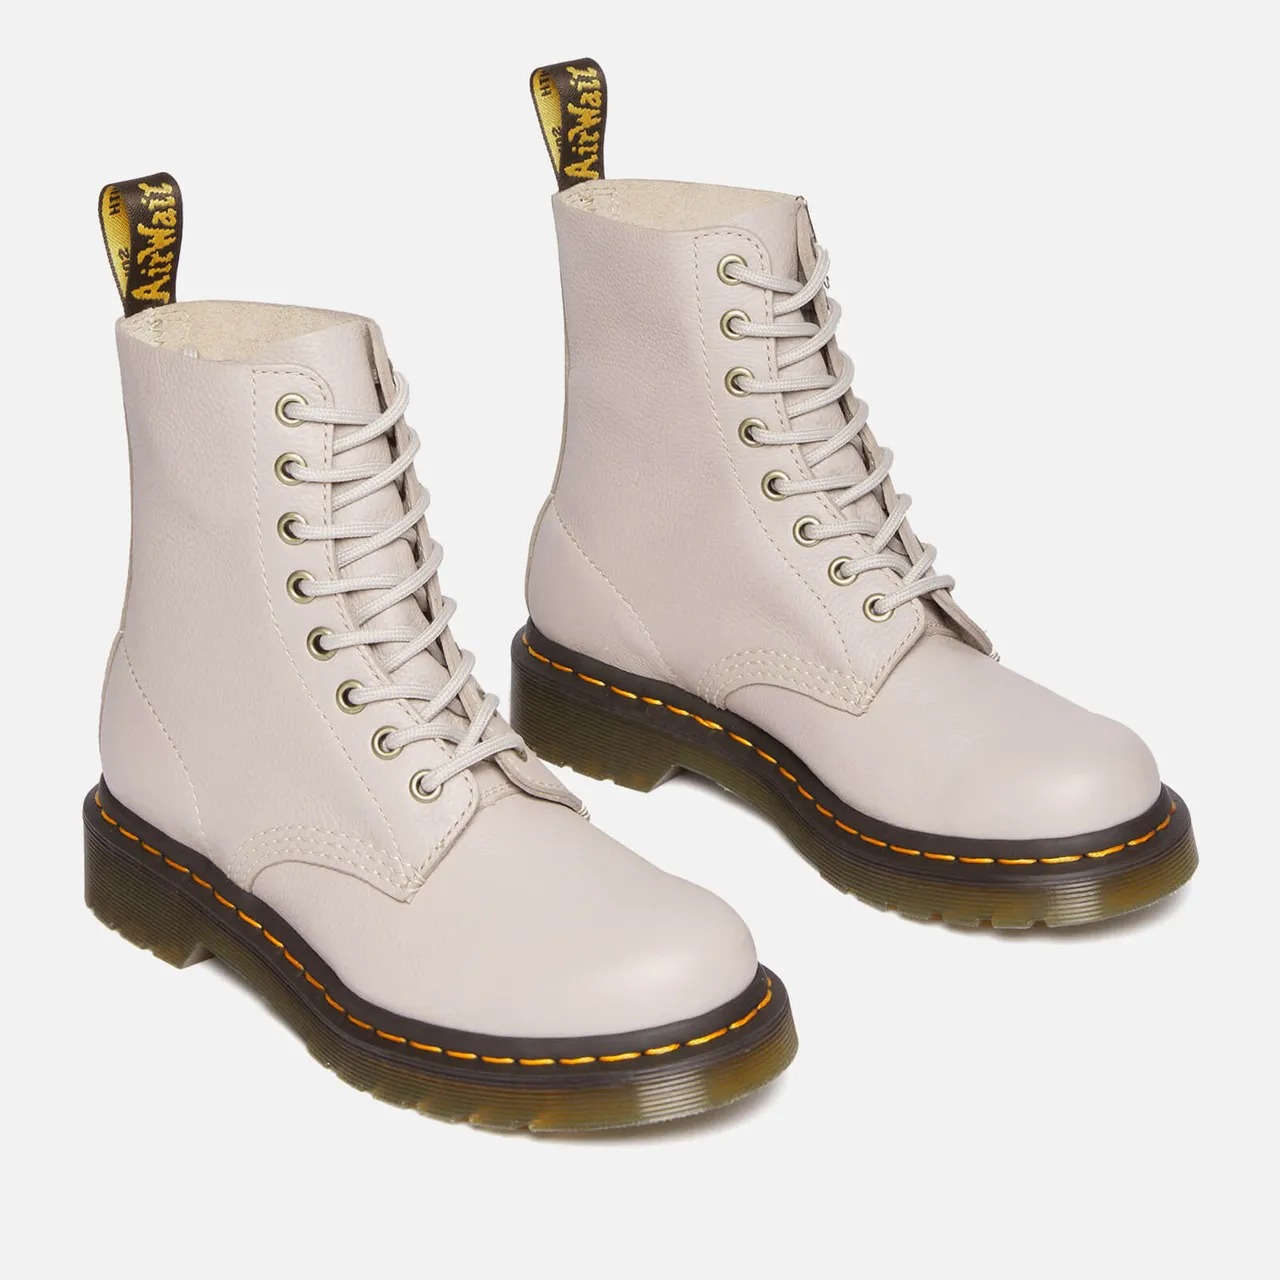 Dr. Martens Women's 1460 Pascal Virginia Leather 8-Eye Boots - UK